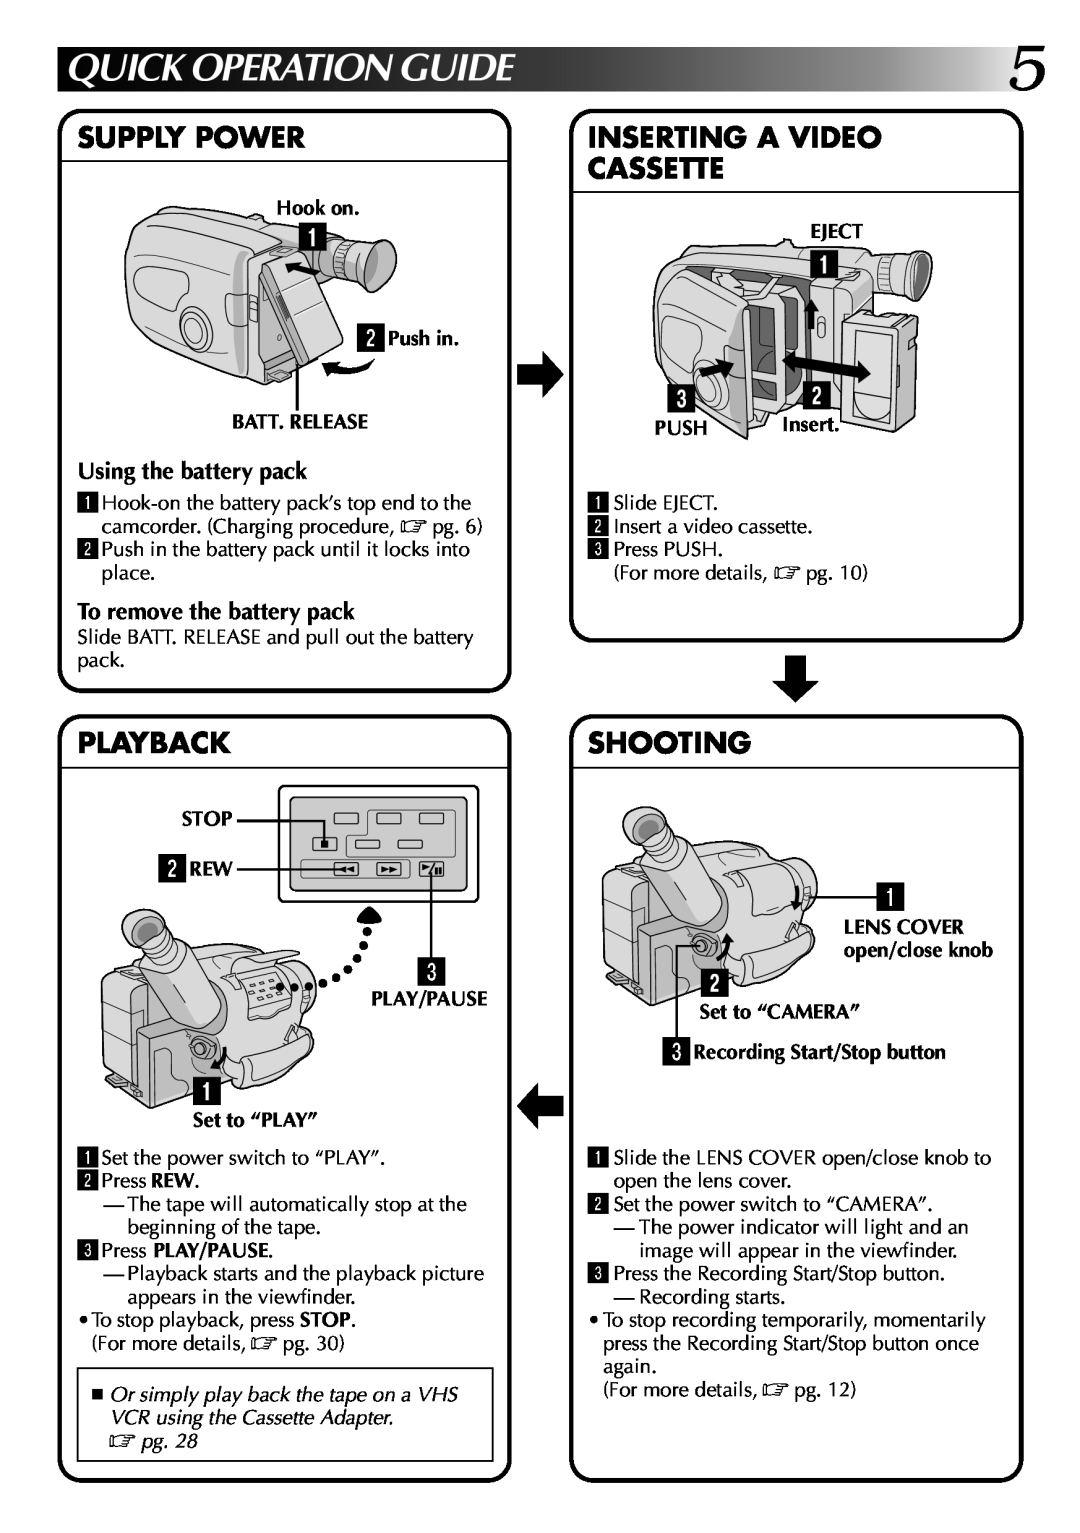 JVC GR-AX270 Quick Operation Guide, Supply Power, Inserting A Video Cassette, Playback, Shooting, Using the battery pack 